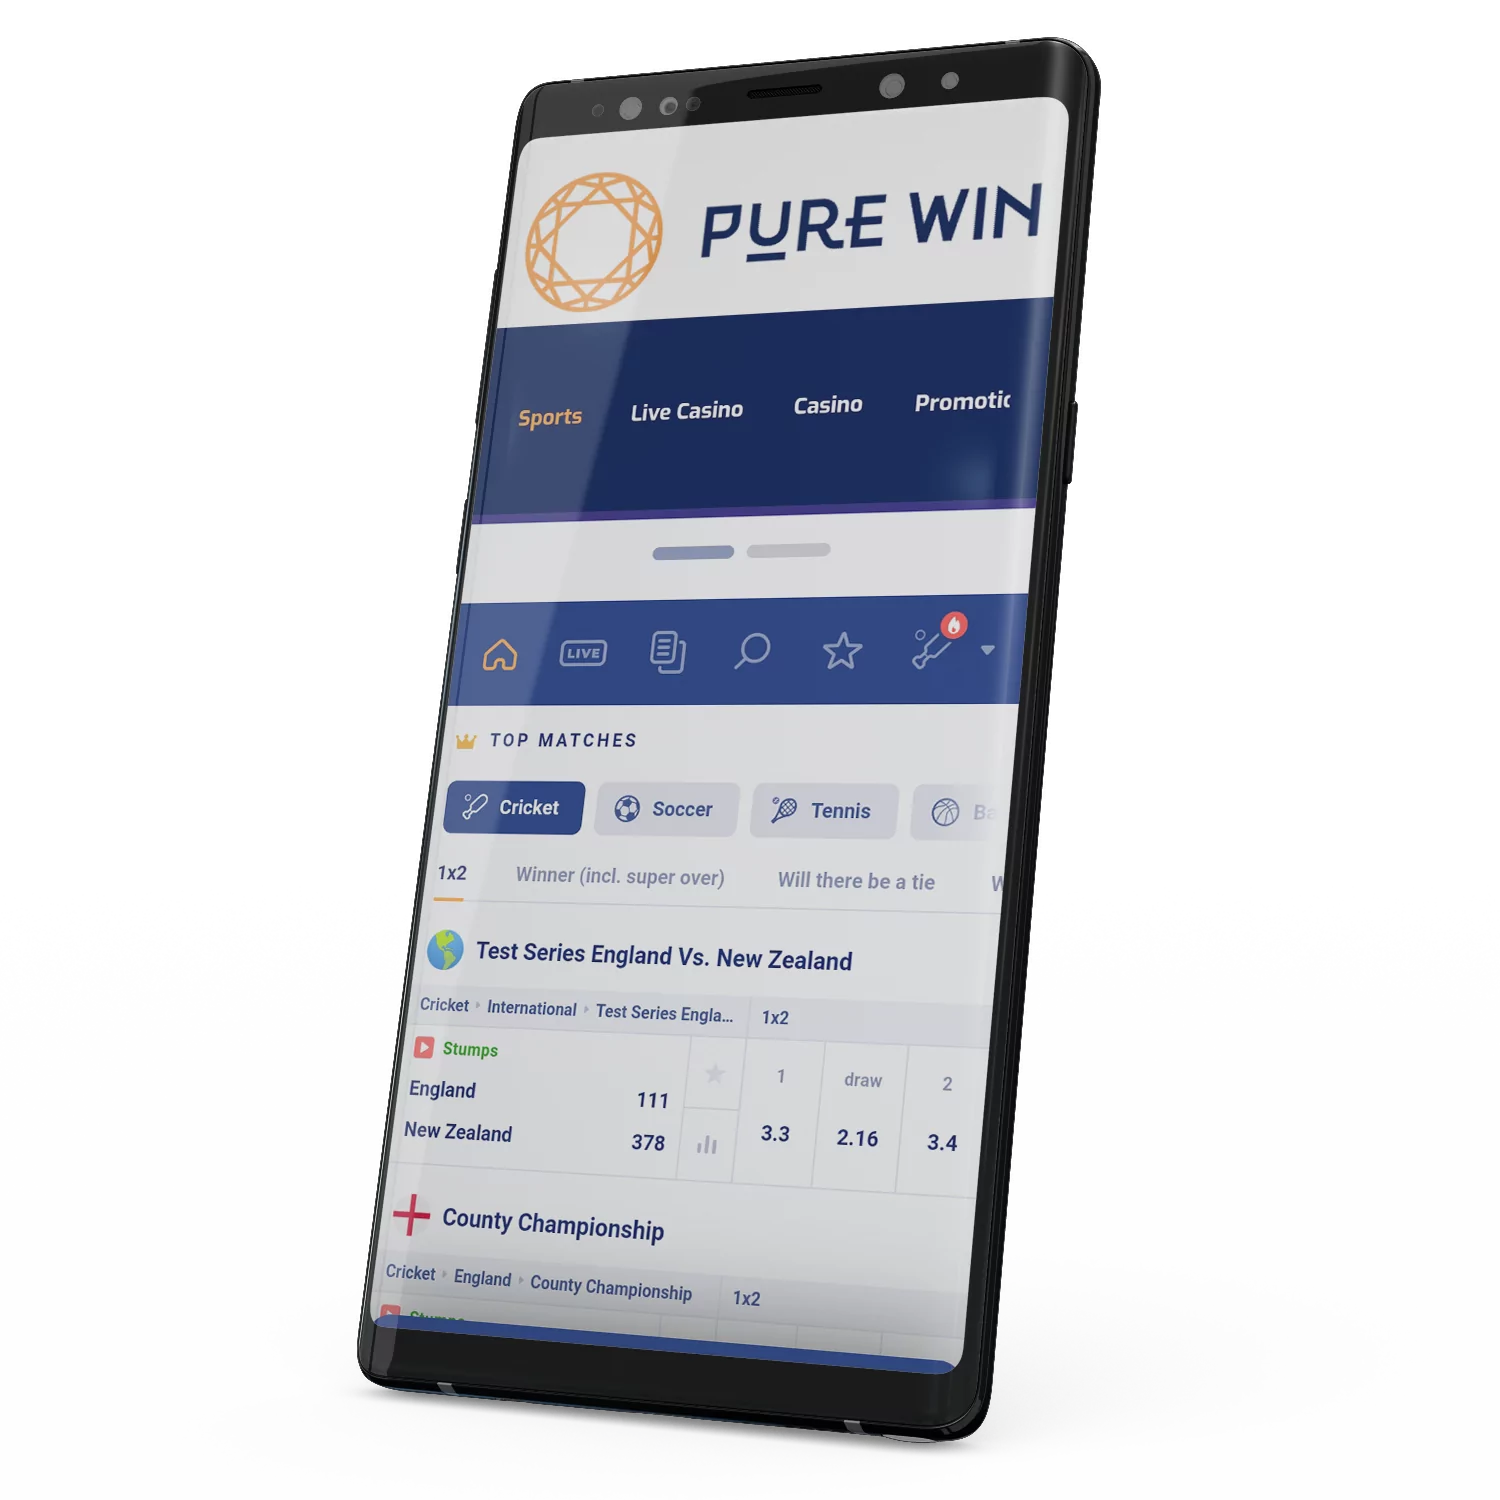 In this review, learn about using the Pure Win mobile app.